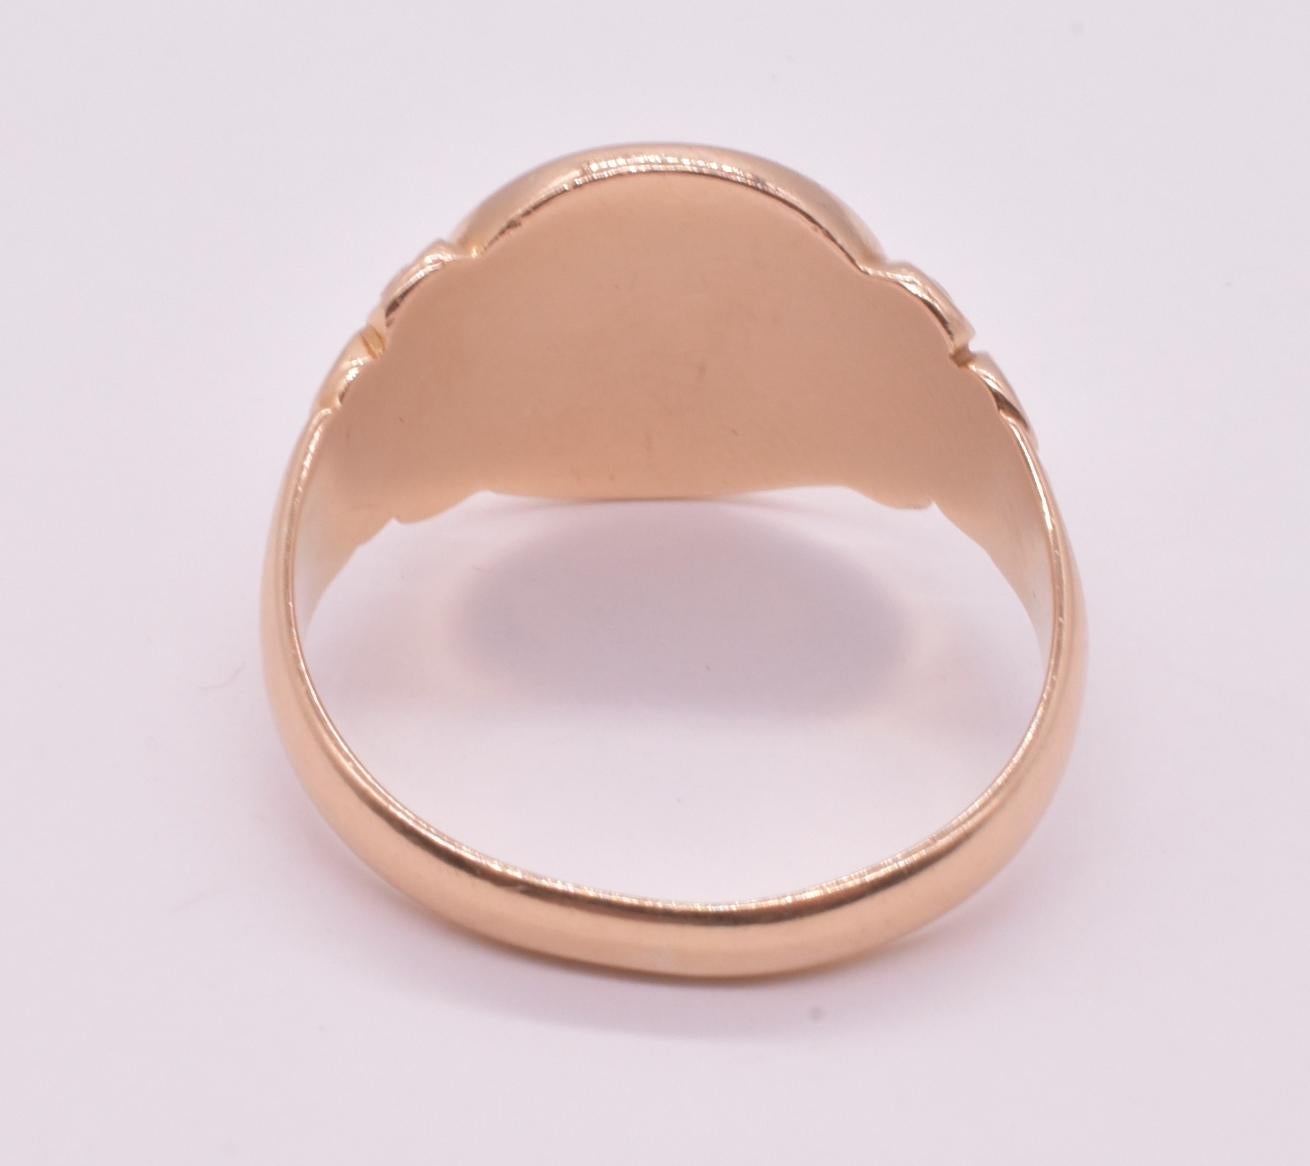 Late Victorian signet ring, hallmarked for the year 1907-1908 and monogrammed with initials WW or MM, carved to a polished gold face and set into a band with carved scrolled shoulders. The ring featured on this listing is modeled on the ring finger.